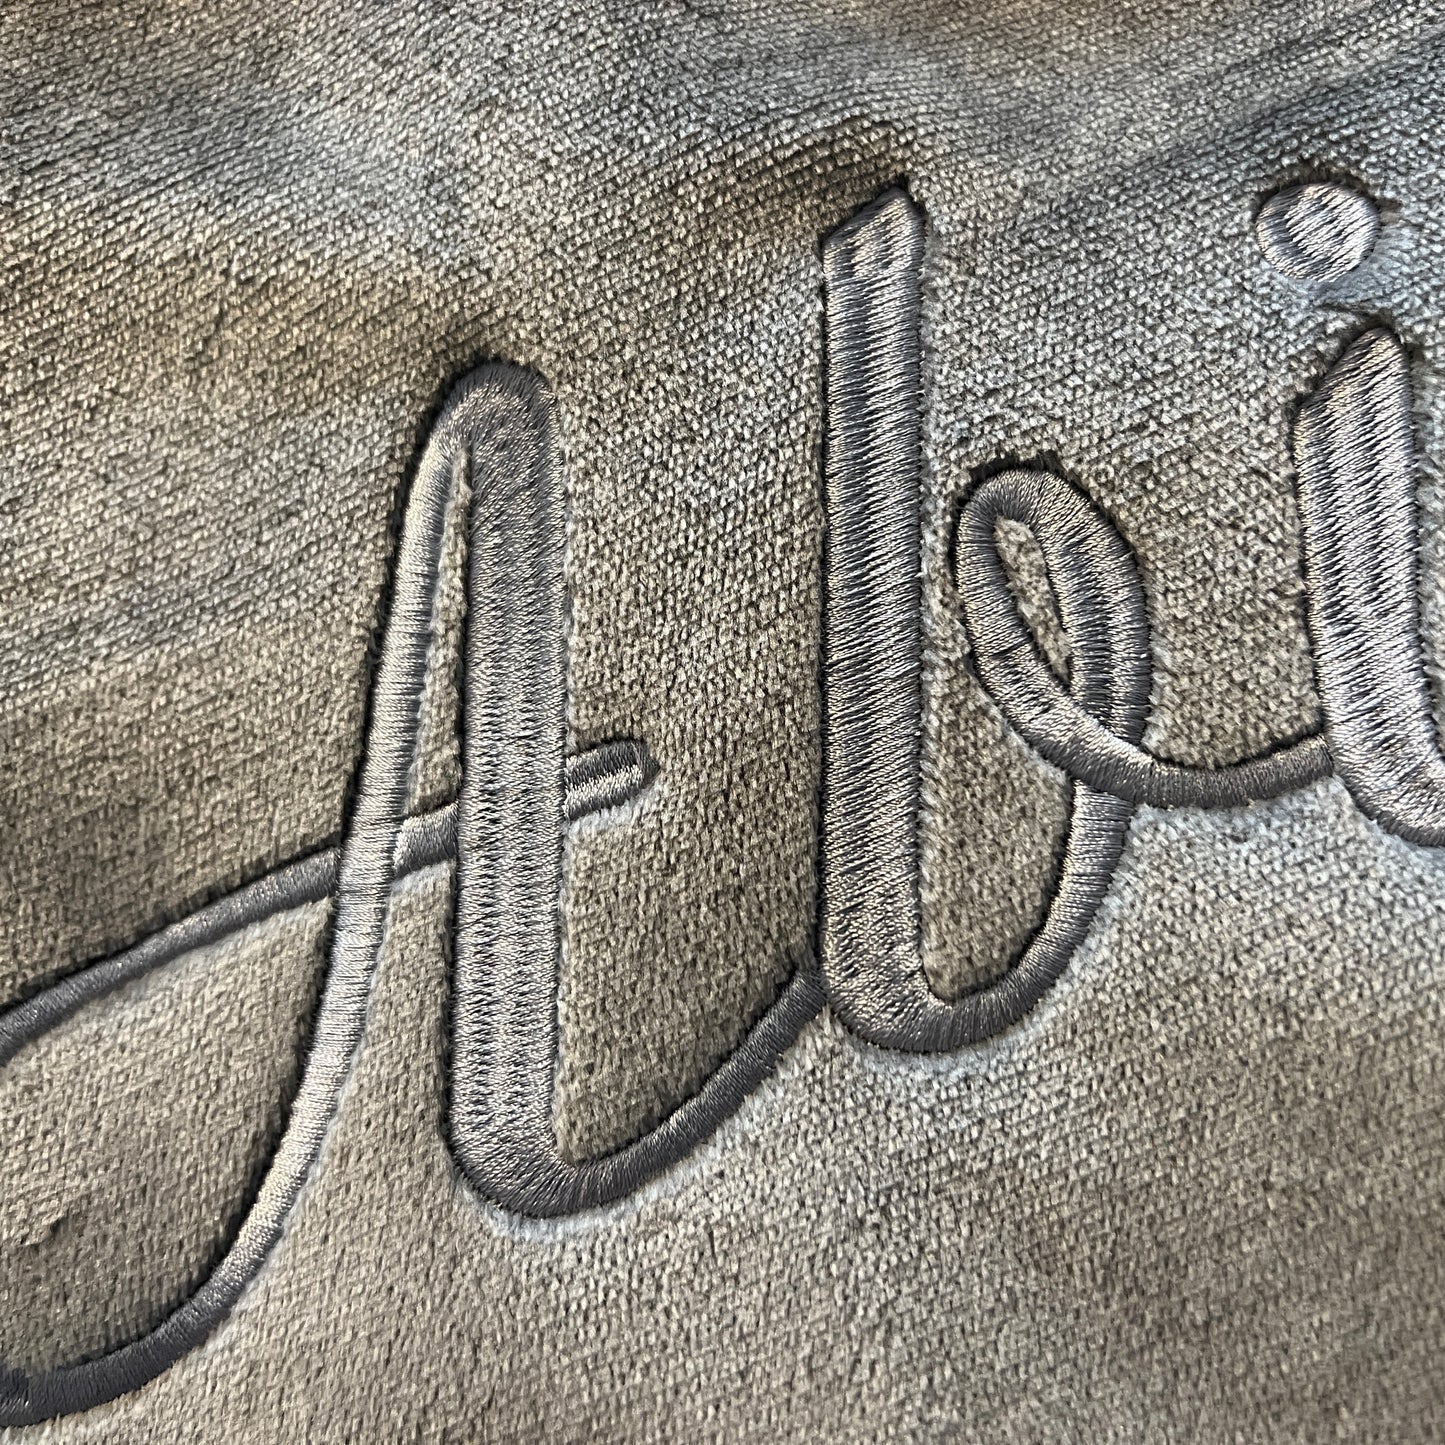 Embroidered Throw (Personalized)